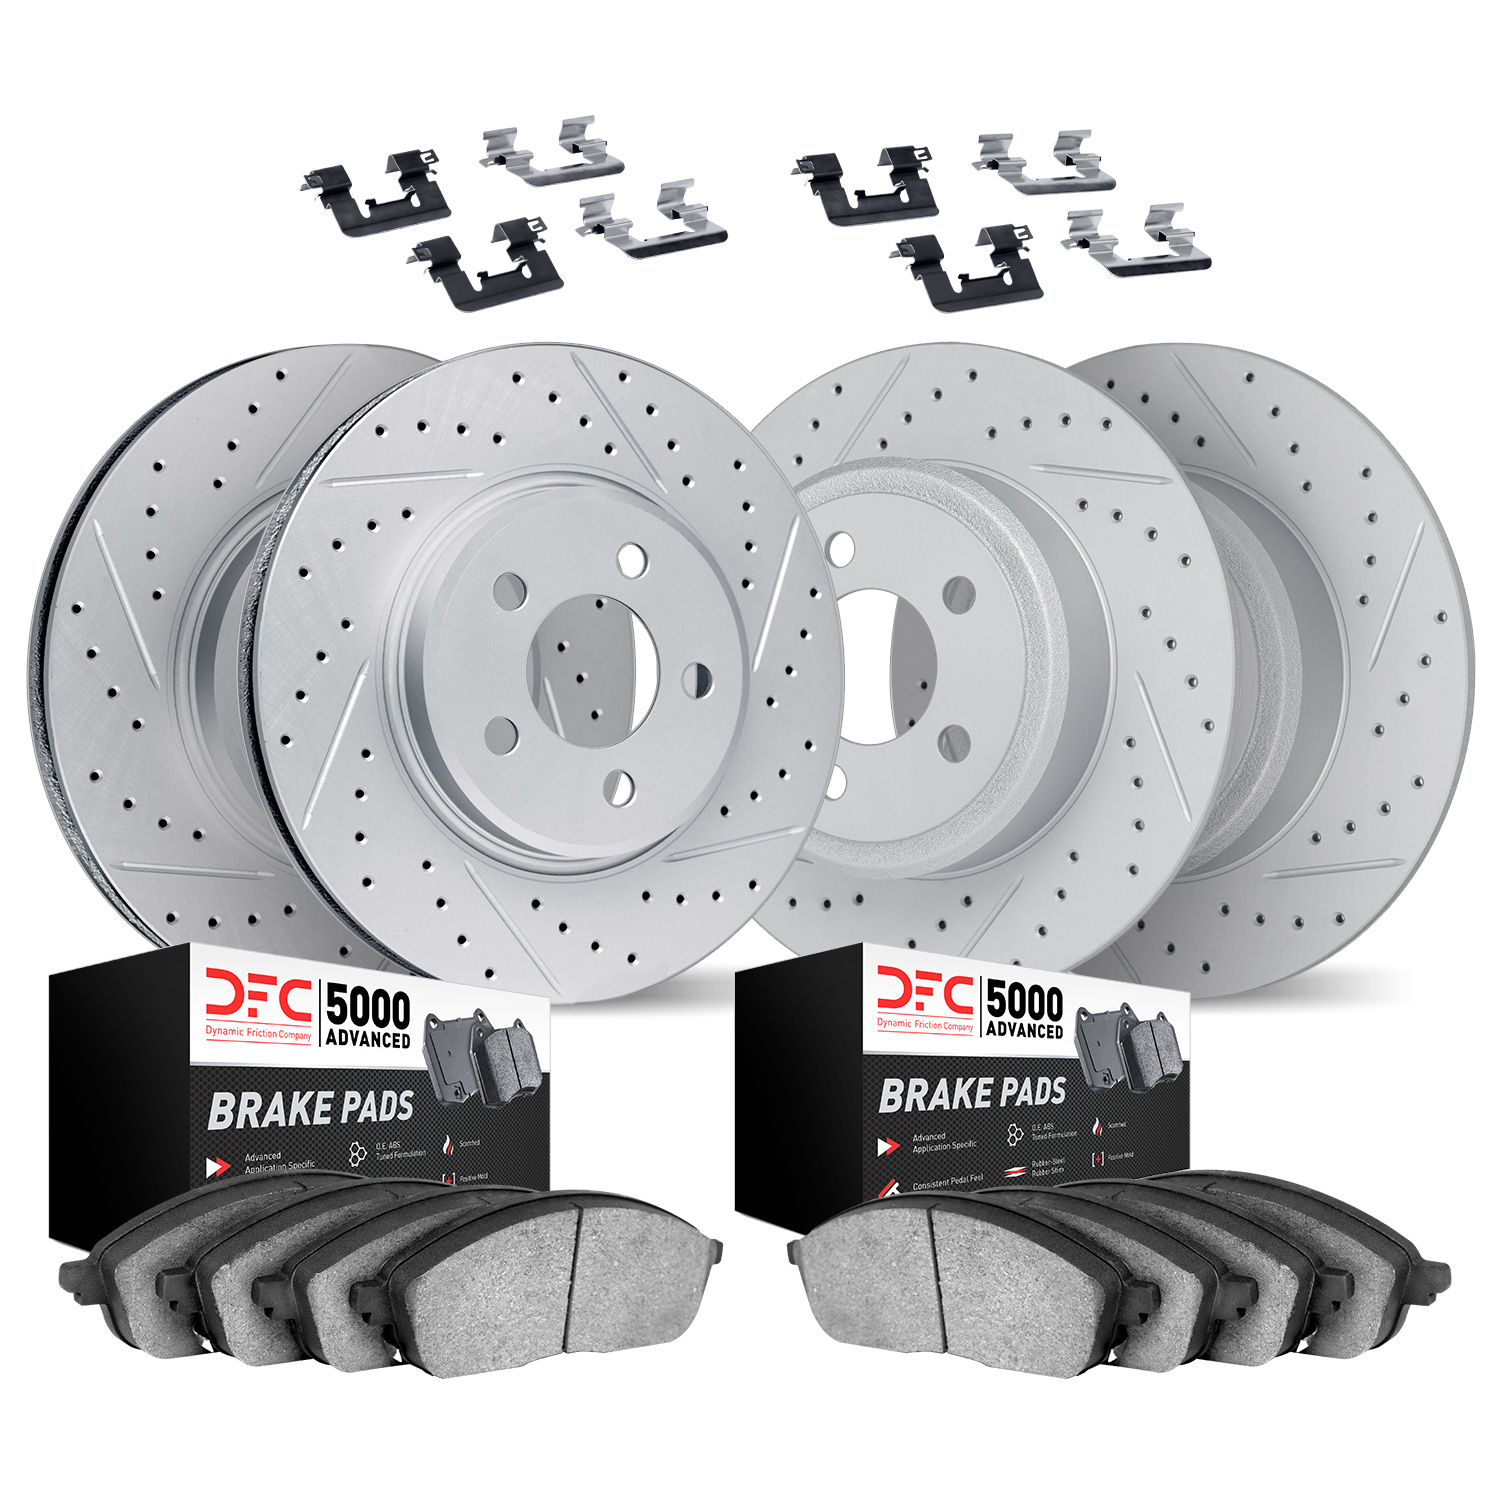 2514-45029 Geoperformance Drilled/Slotted Rotors w/5000 Advanced Brake Pads Kit & Hardware, 2016-2020 GM, Position: Front and Re